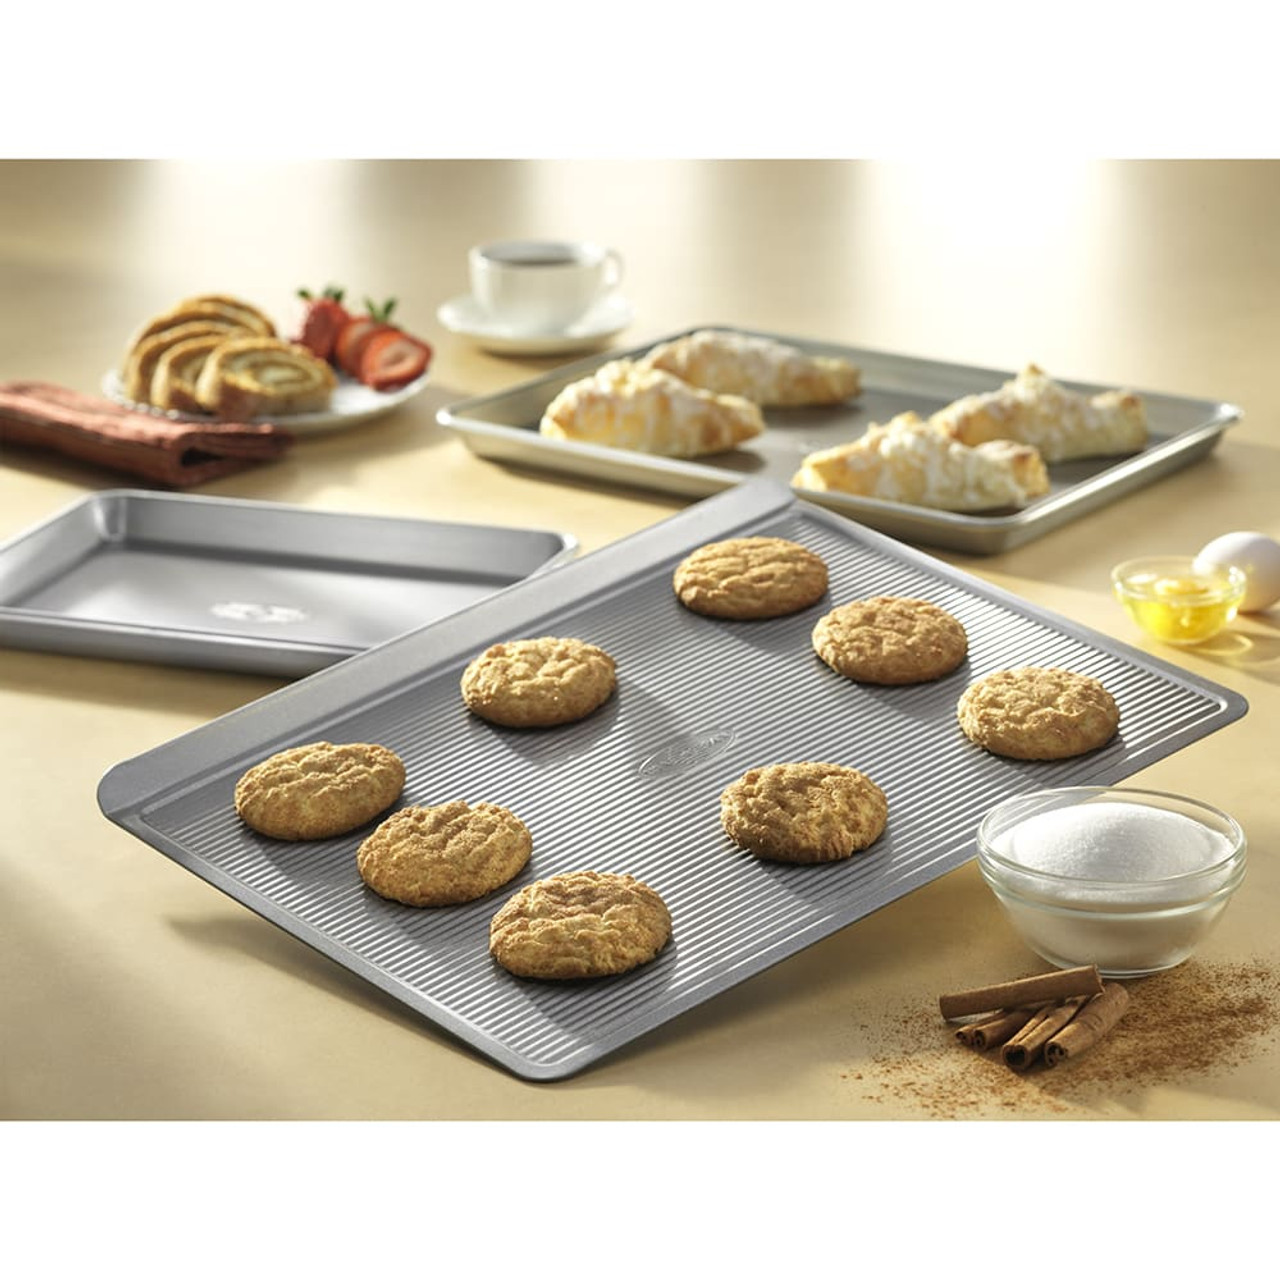 https://cdn11.bigcommerce.com/s-hccytny0od/images/stencil/1280x1280/products/393/3611/usa-pan-three-piece-bakeware-set-1__70806.1596123899.jpg?c=2?imbypass=on